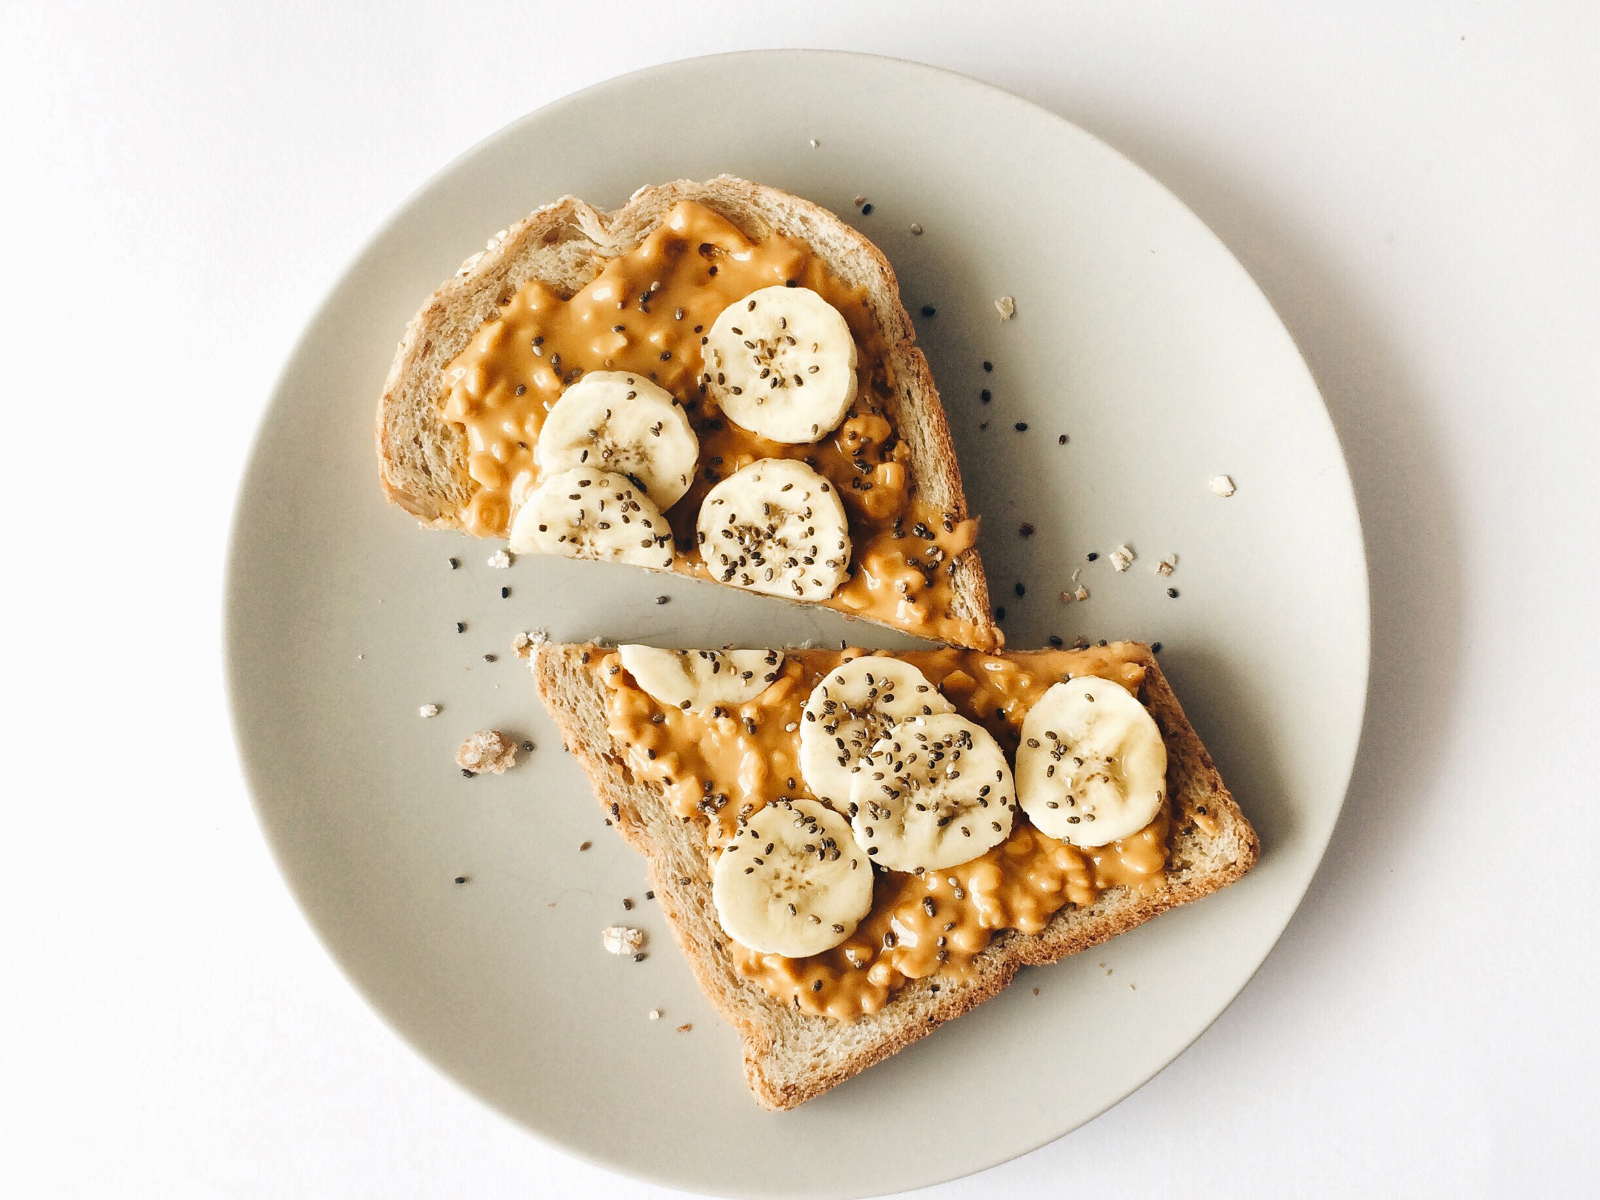 peanut butter on bread with banana and chia seeds